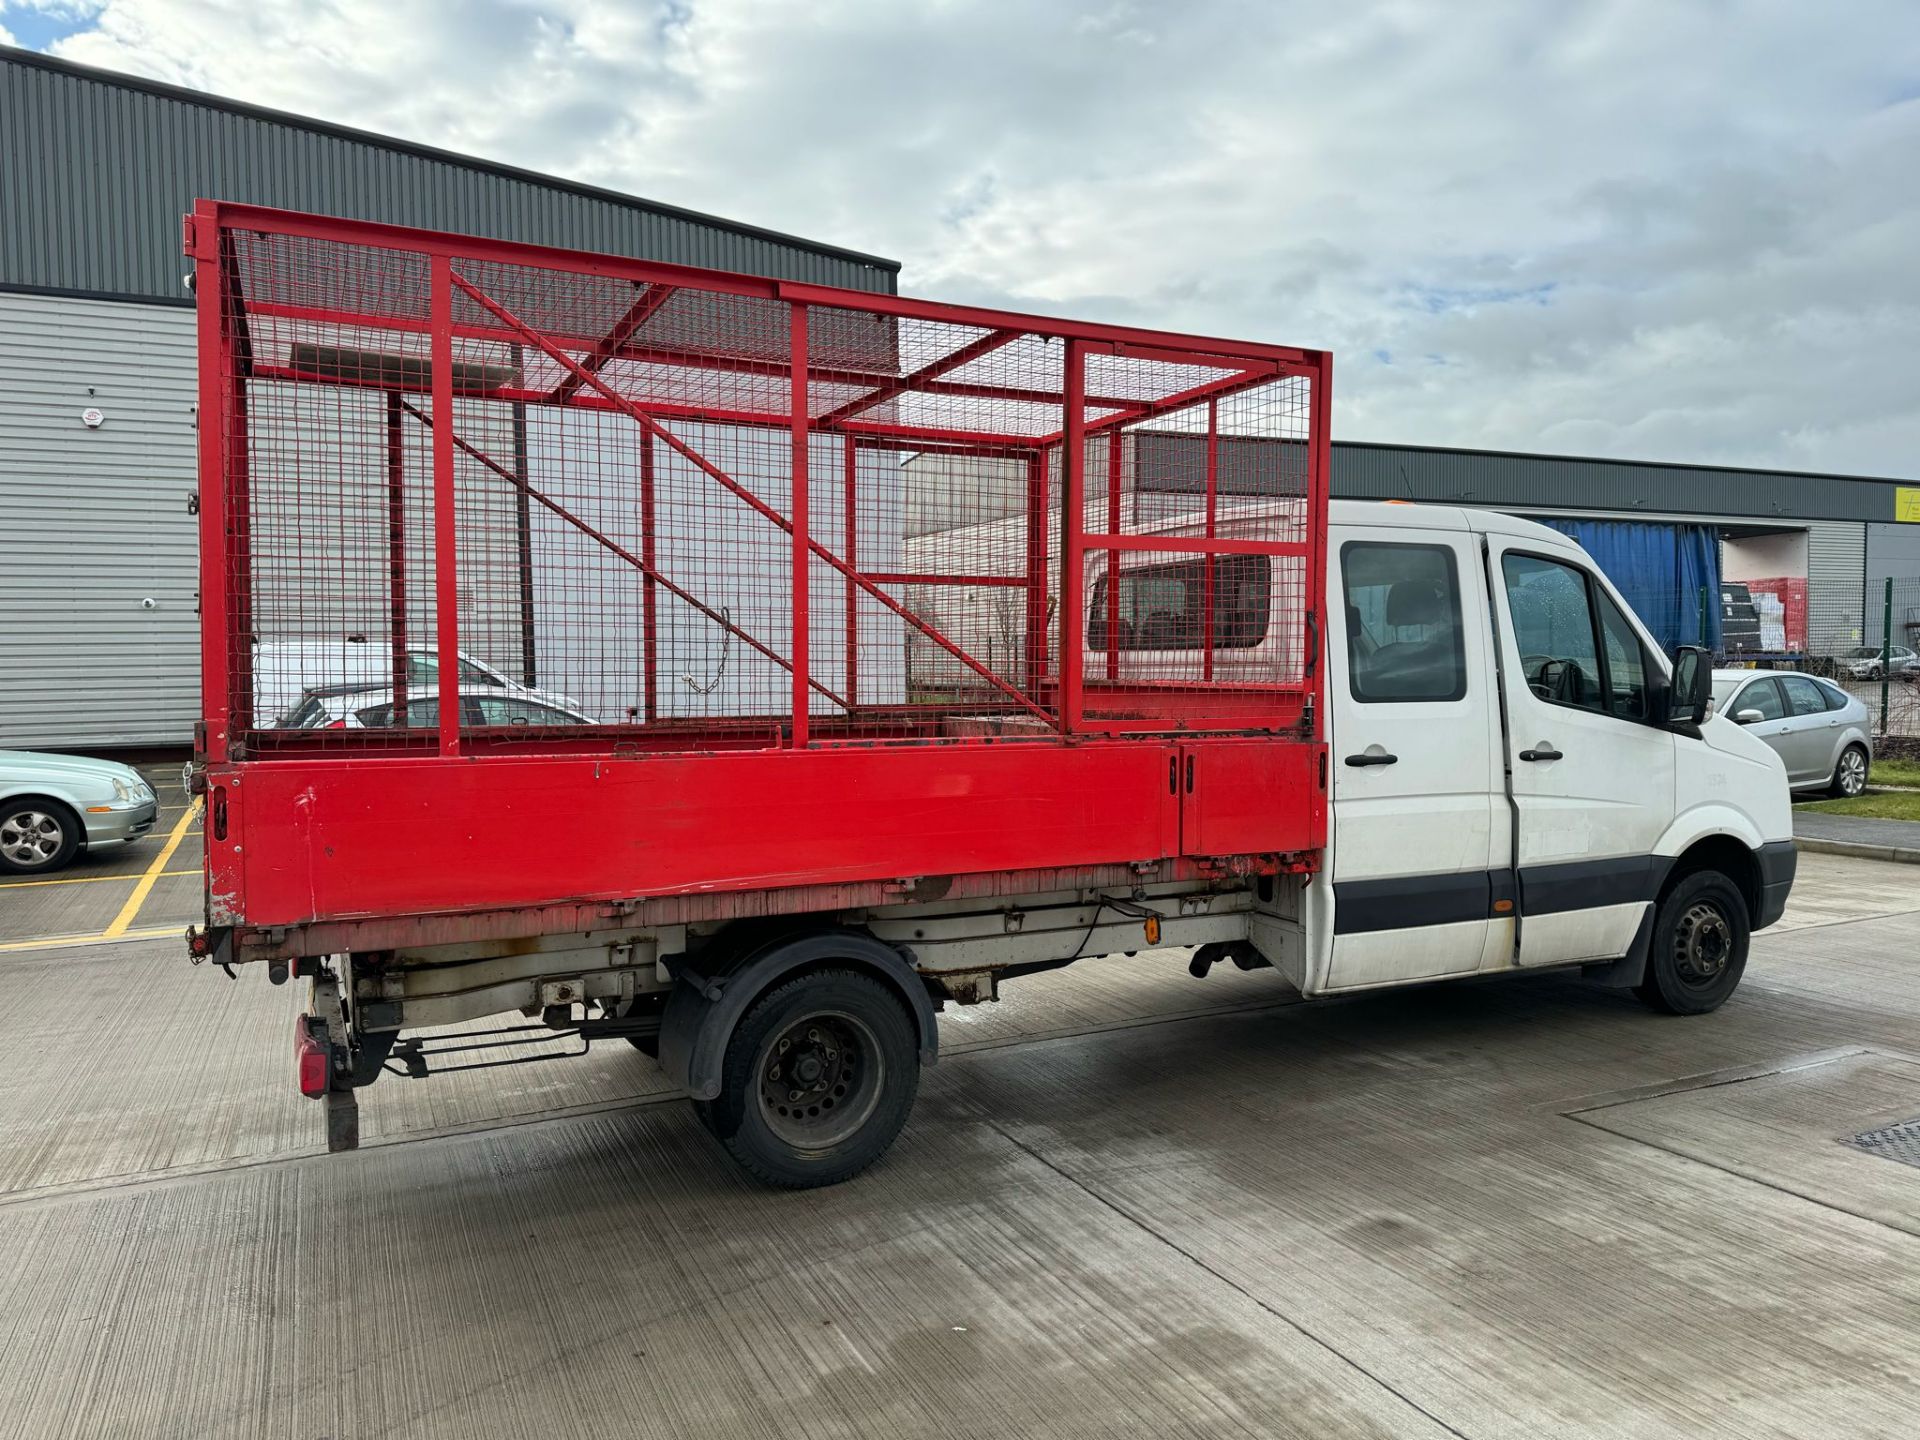 2013 - Volkswagen Crafter, Caged Tipper (Ex-Council Owned & Maintained) - Image 12 of 25